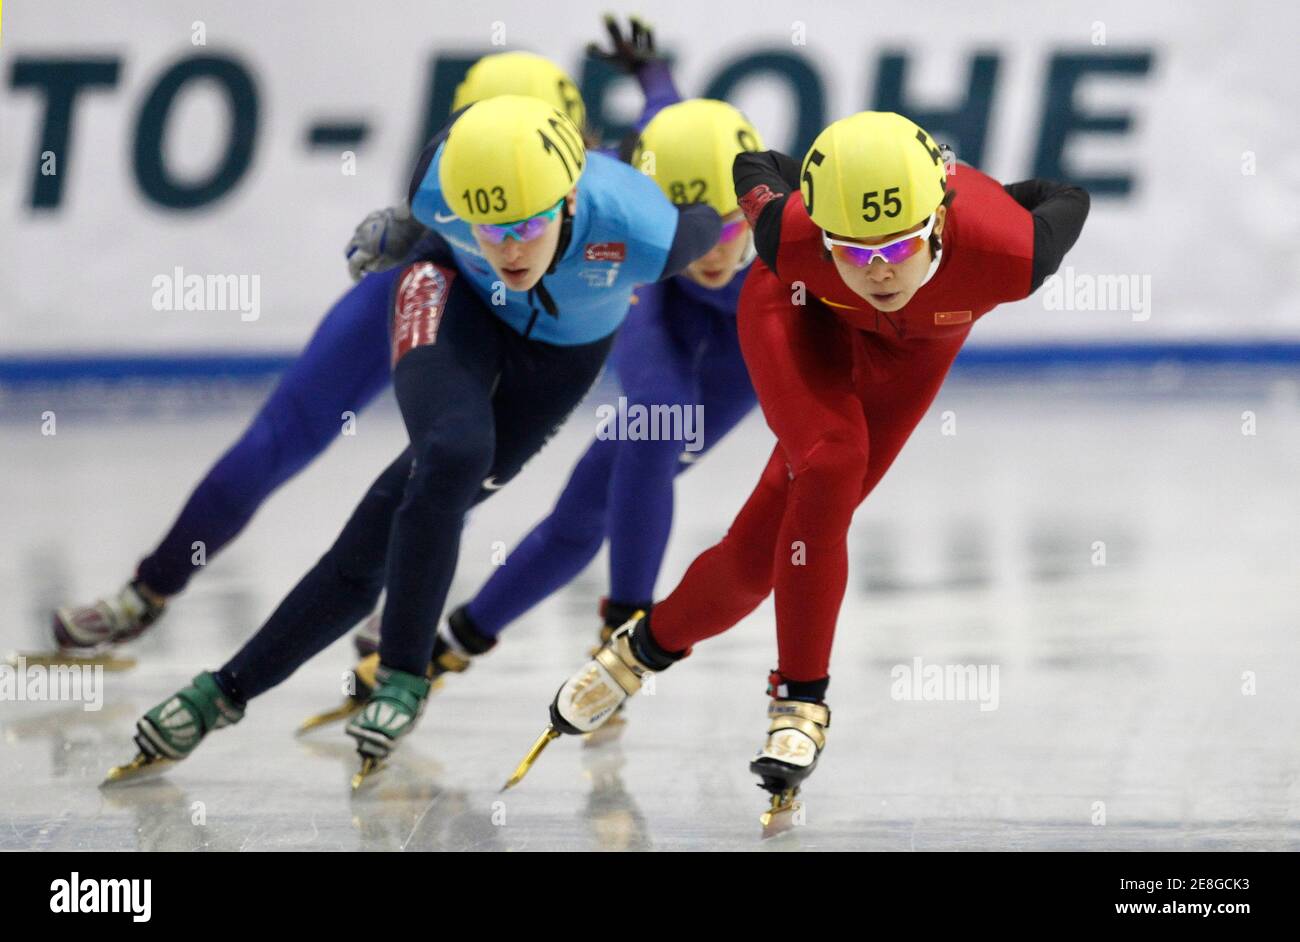 China's Wang Meng (55) leads Katherine Reutter of the US (103) in the women's 1000 metres final during the World Short Track Speed Skating Championships 2010 at Winter Sport Hall in Sofia, March 21, 2010.    REUTERS/Oleg Popov   (BULGARIA) Stock Photo